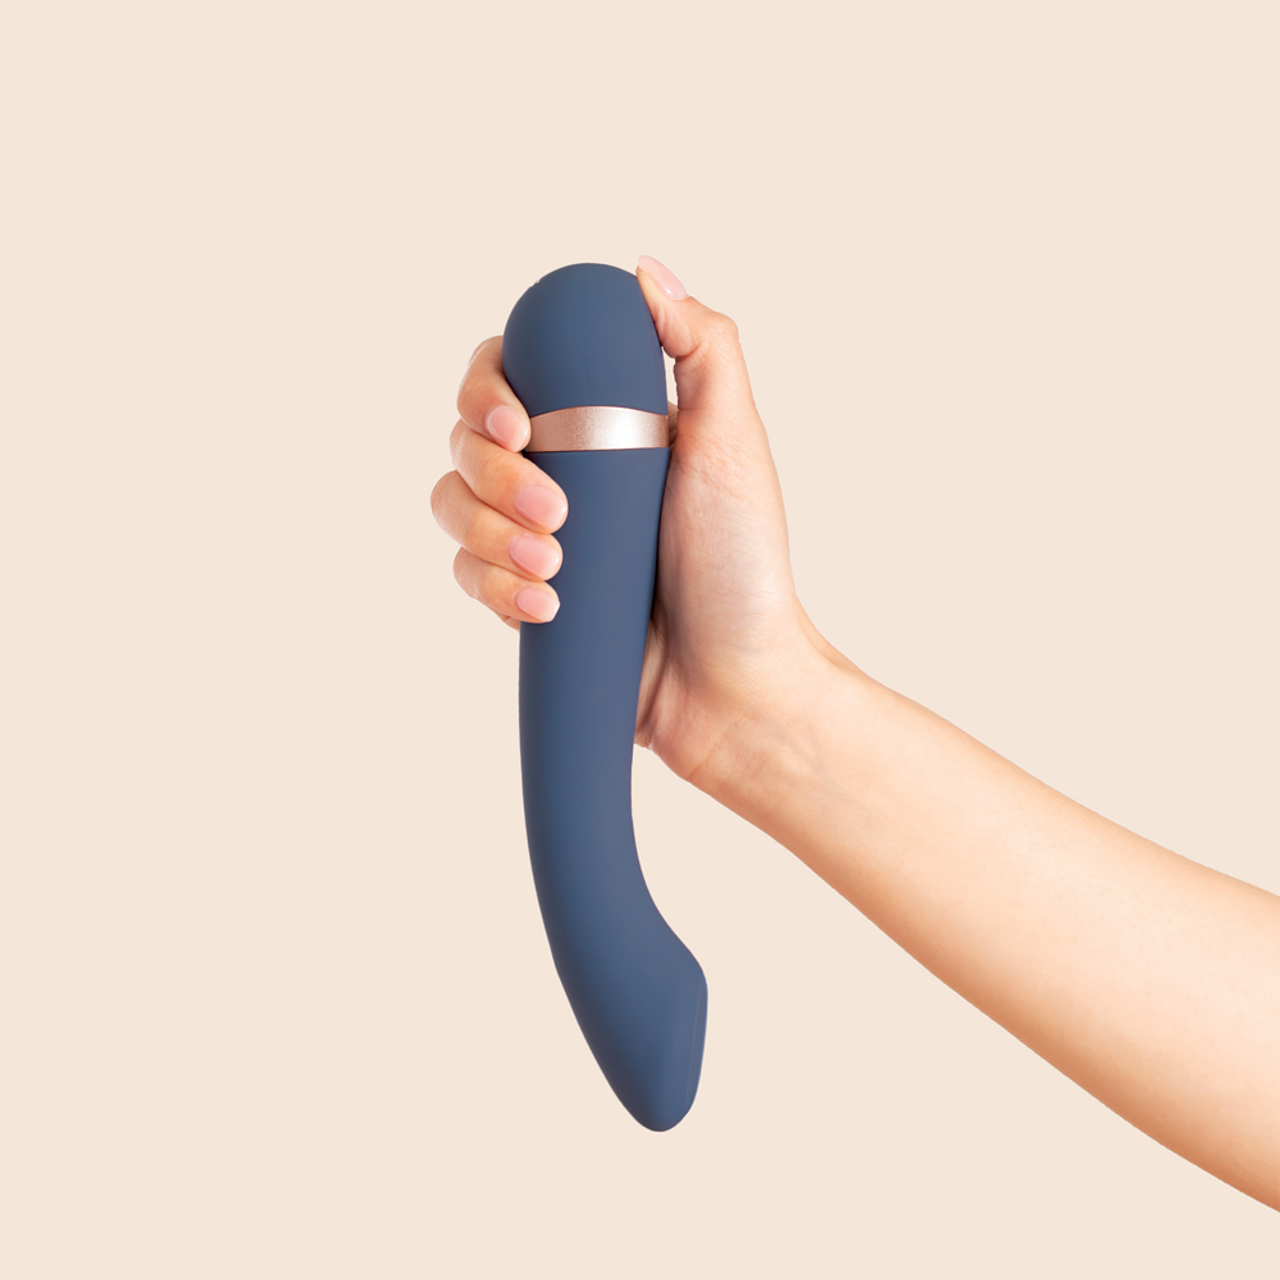 DEIA THE HOT AND COLD TEMPERATURE CHANGING G SPOT MASSAGER